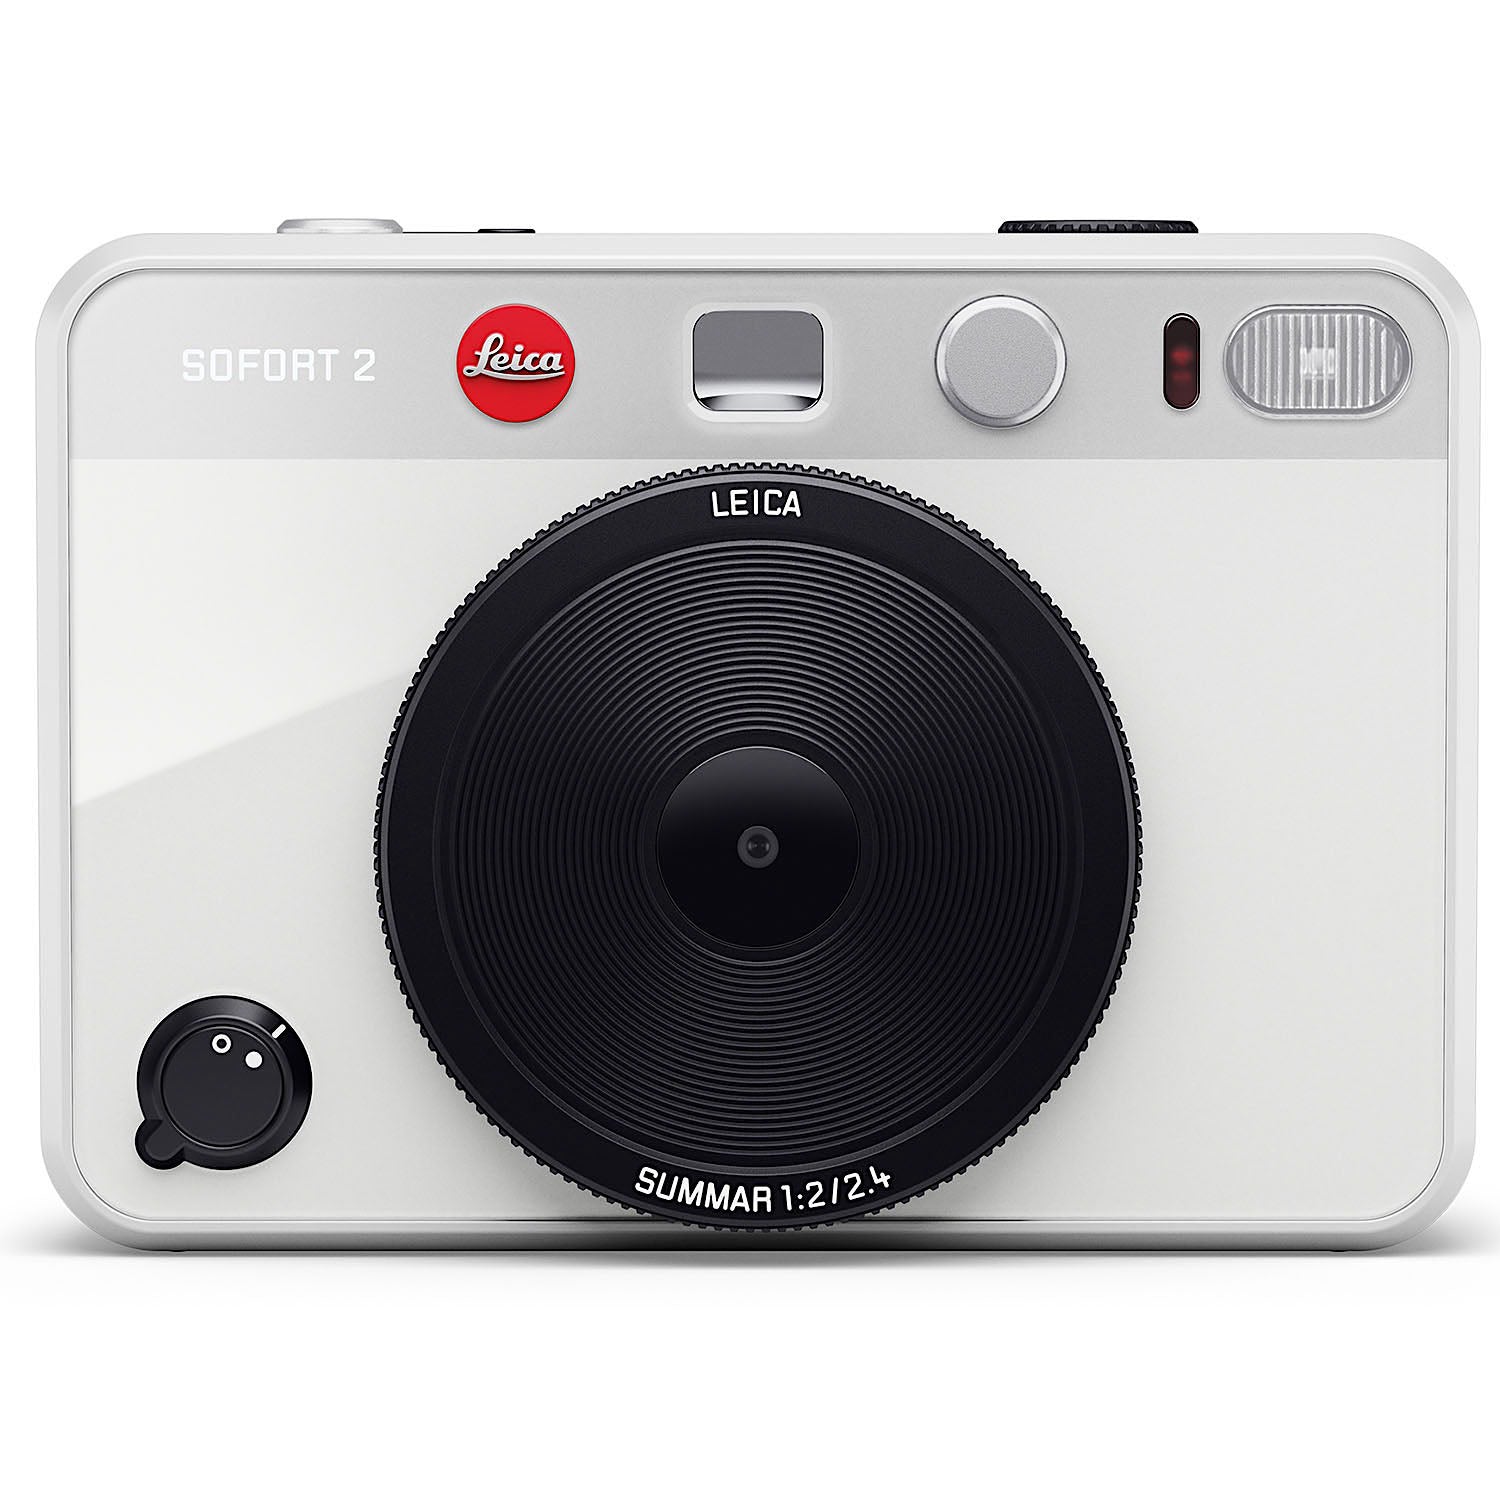 Leica have released some nice storage boxes for instax prints. Any